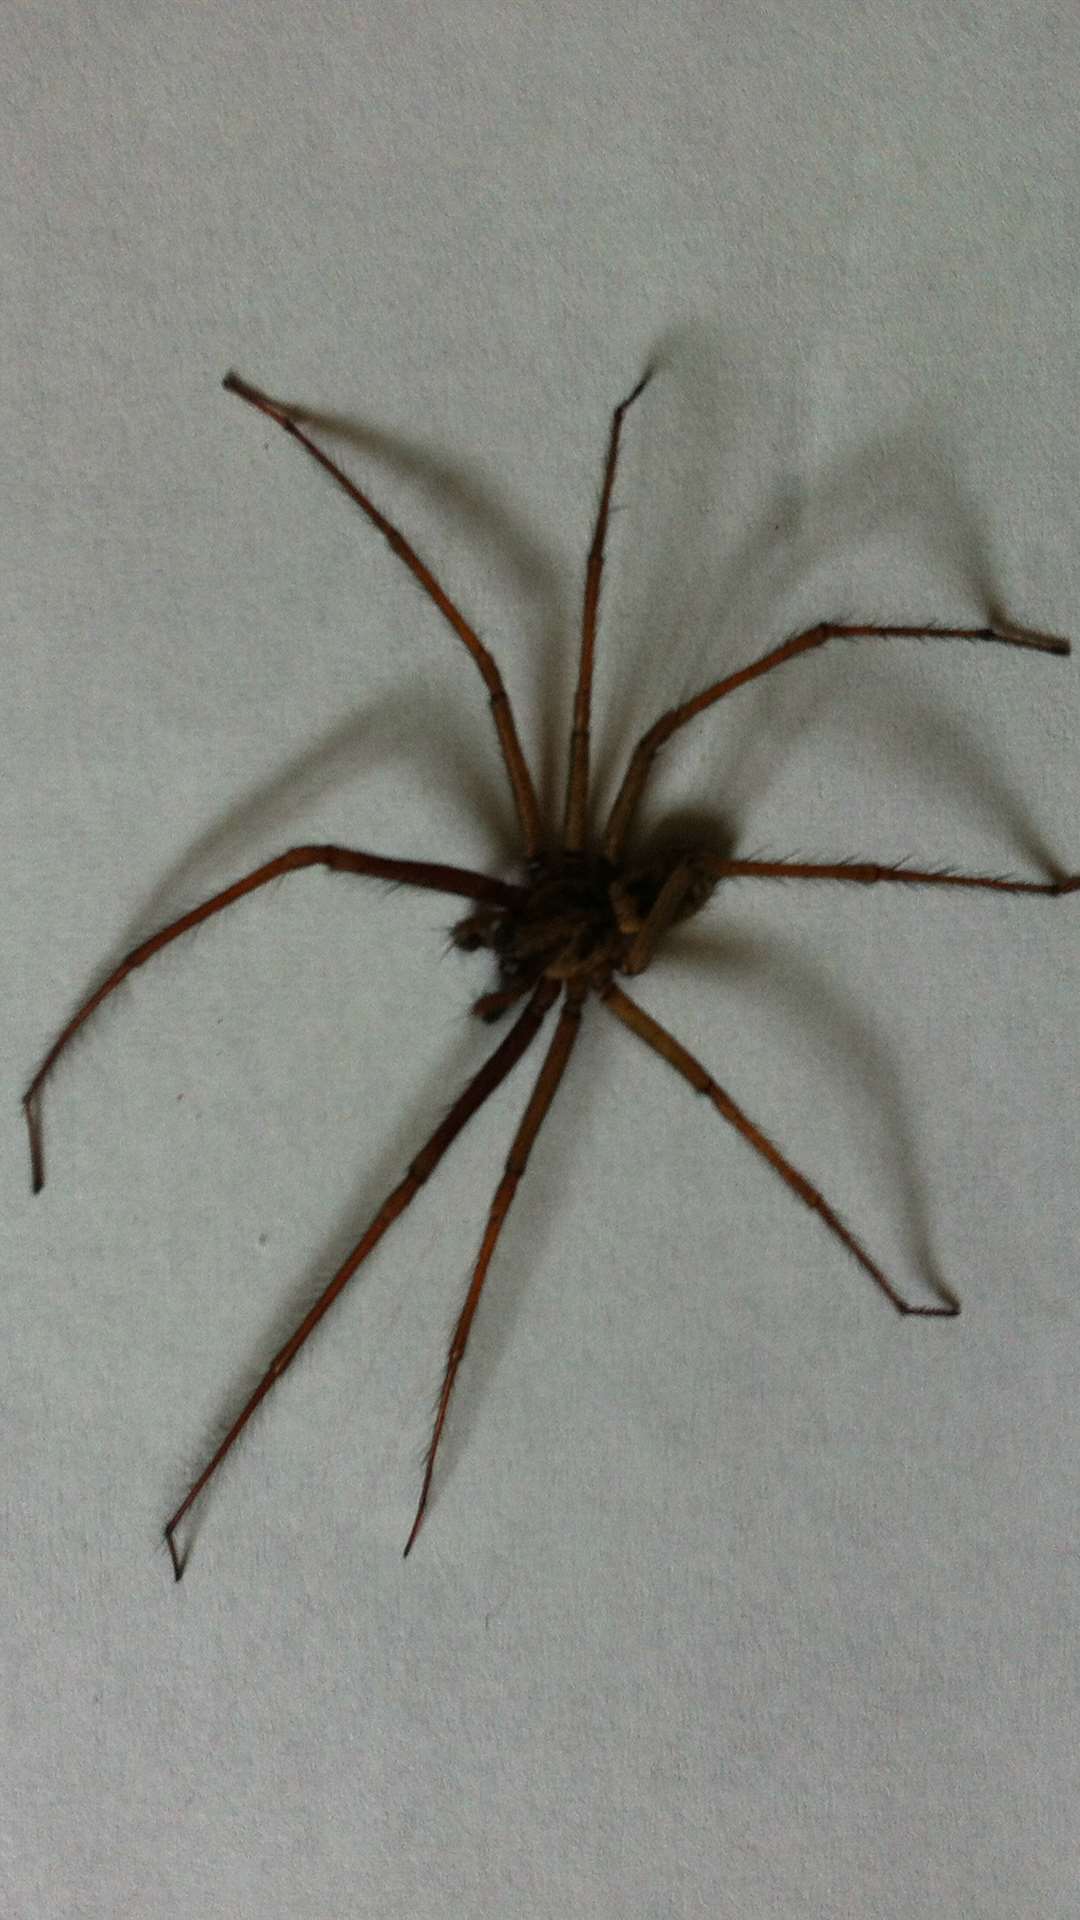 A spider believed to be a false widow found at the home of Lorna Baker-Brown